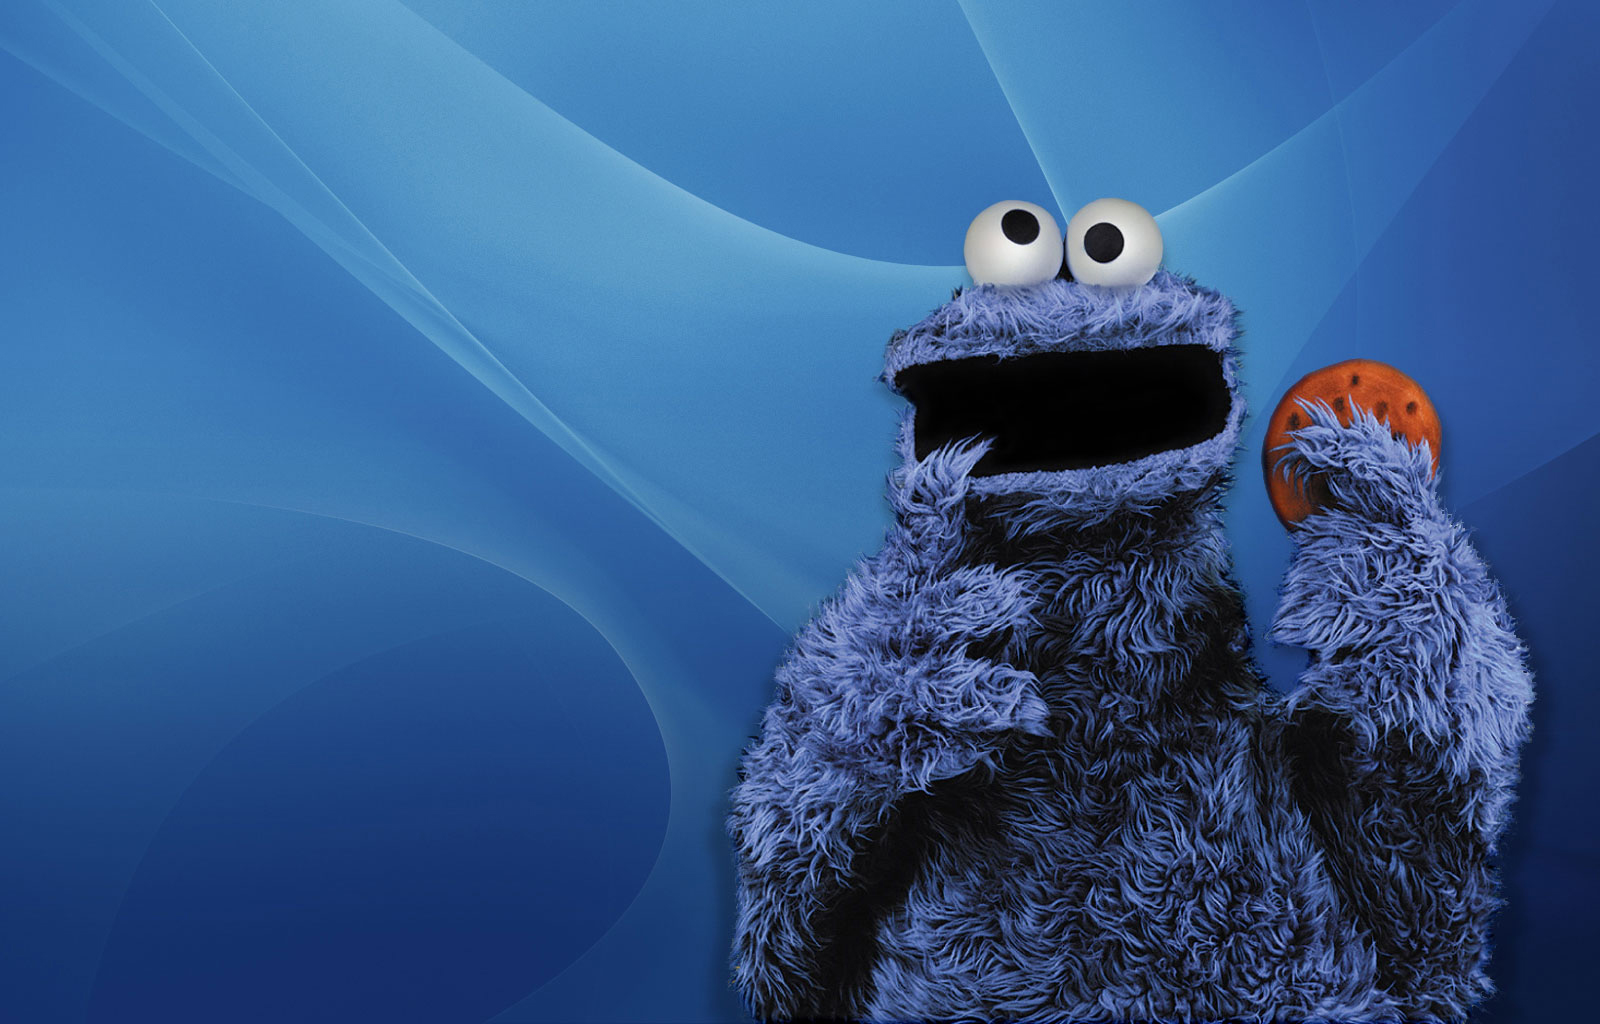 Gallery For Gt Cookie Monster Wallpaper